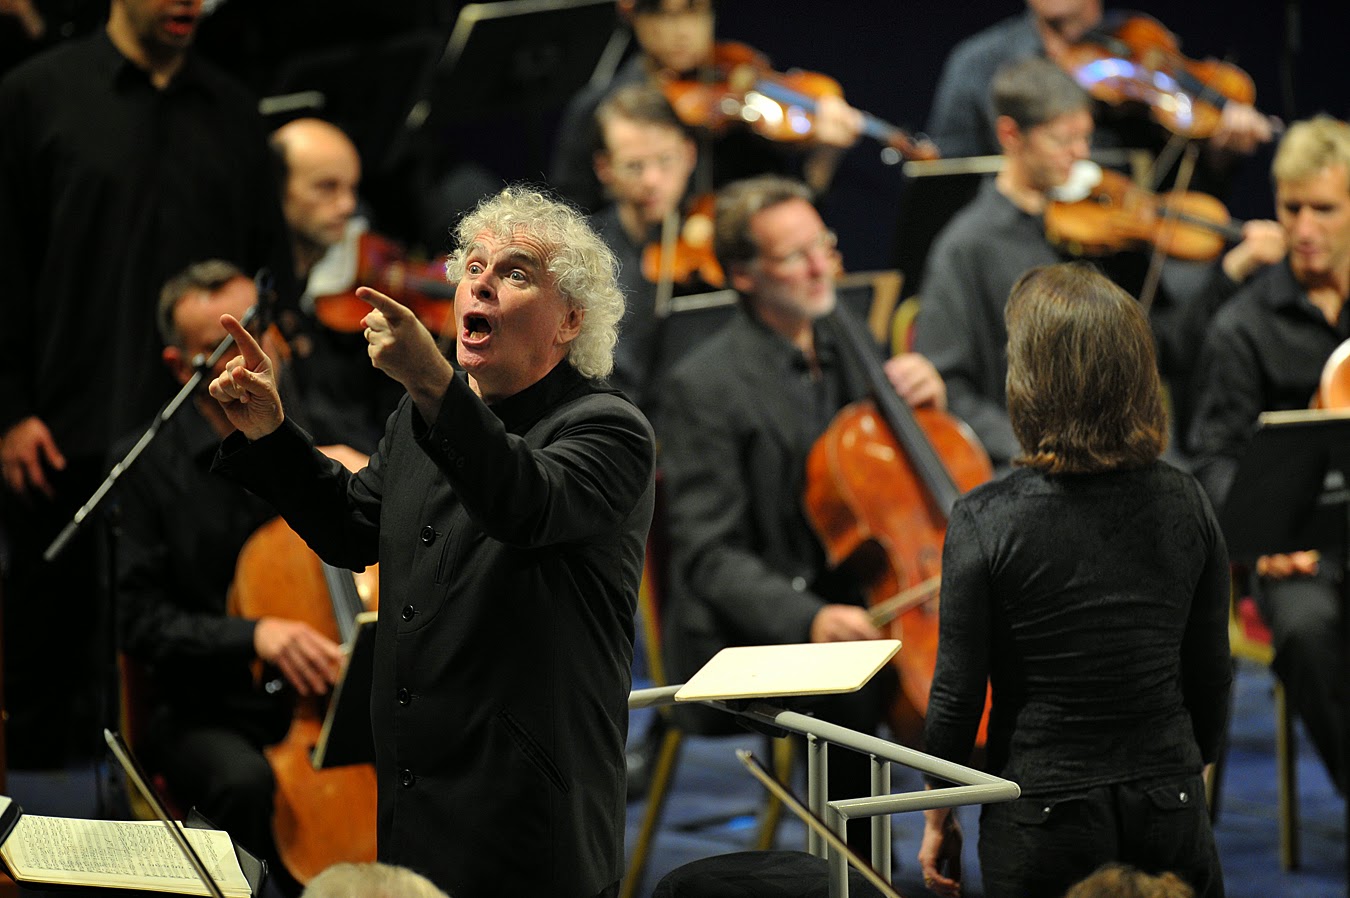 Simon Rattle and the Berlin Philharmonic Orchestra in Bach's St Matthew Passion at the BBC Proms - photo credit BBC / Chris Christodoulou